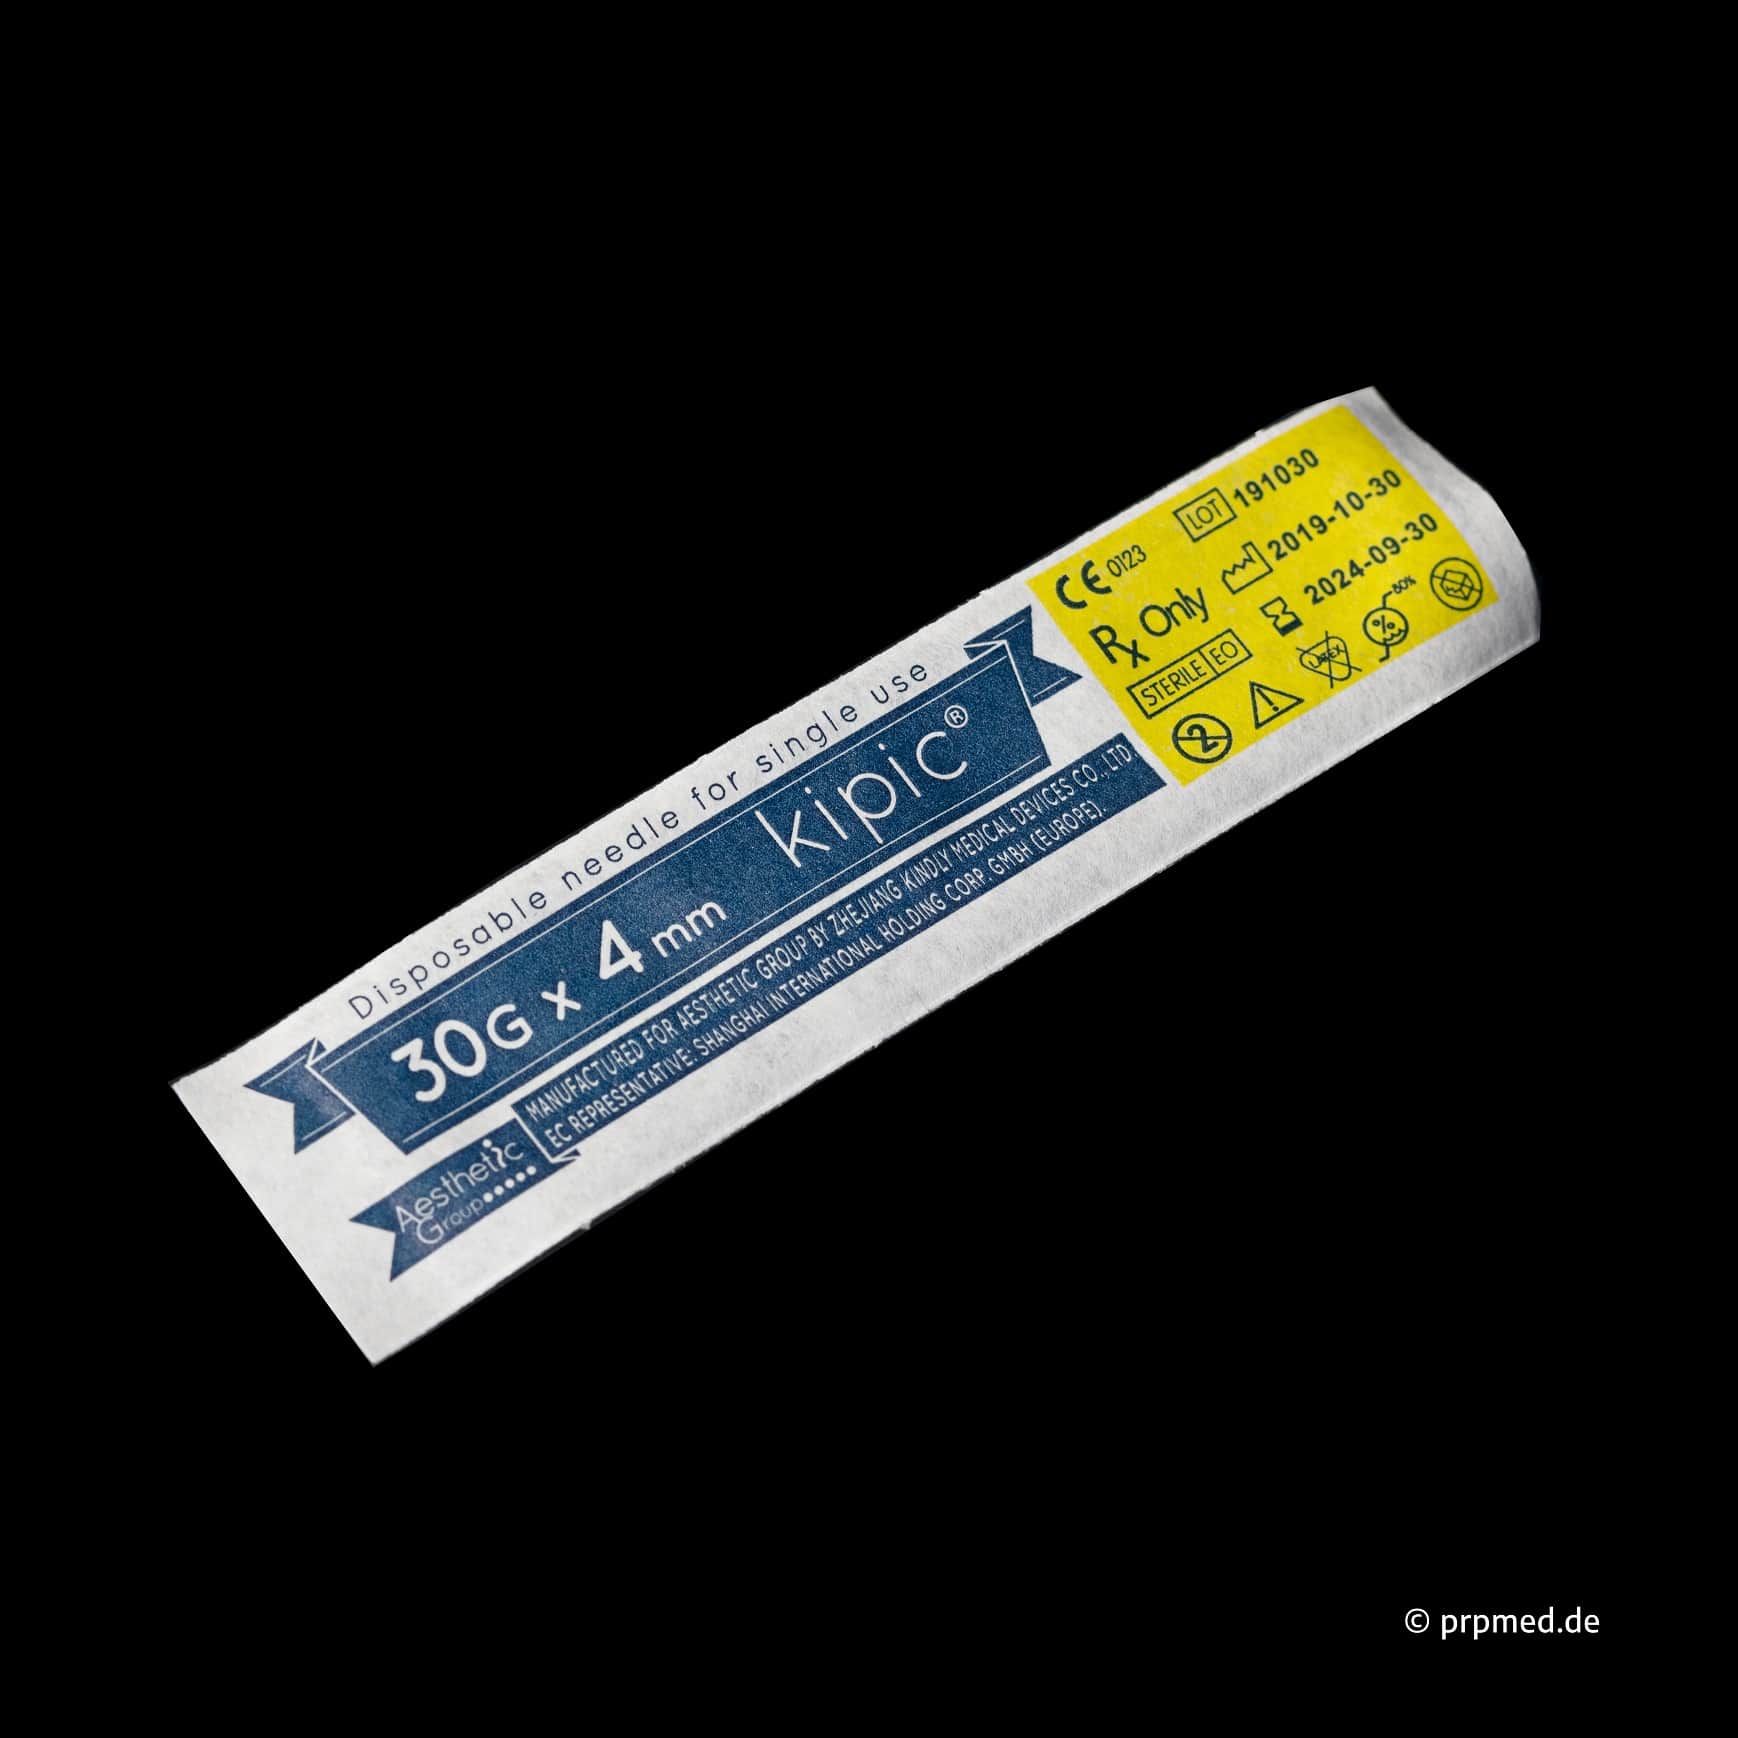 KIPIC® Mesotherapy needle 30G 4mm